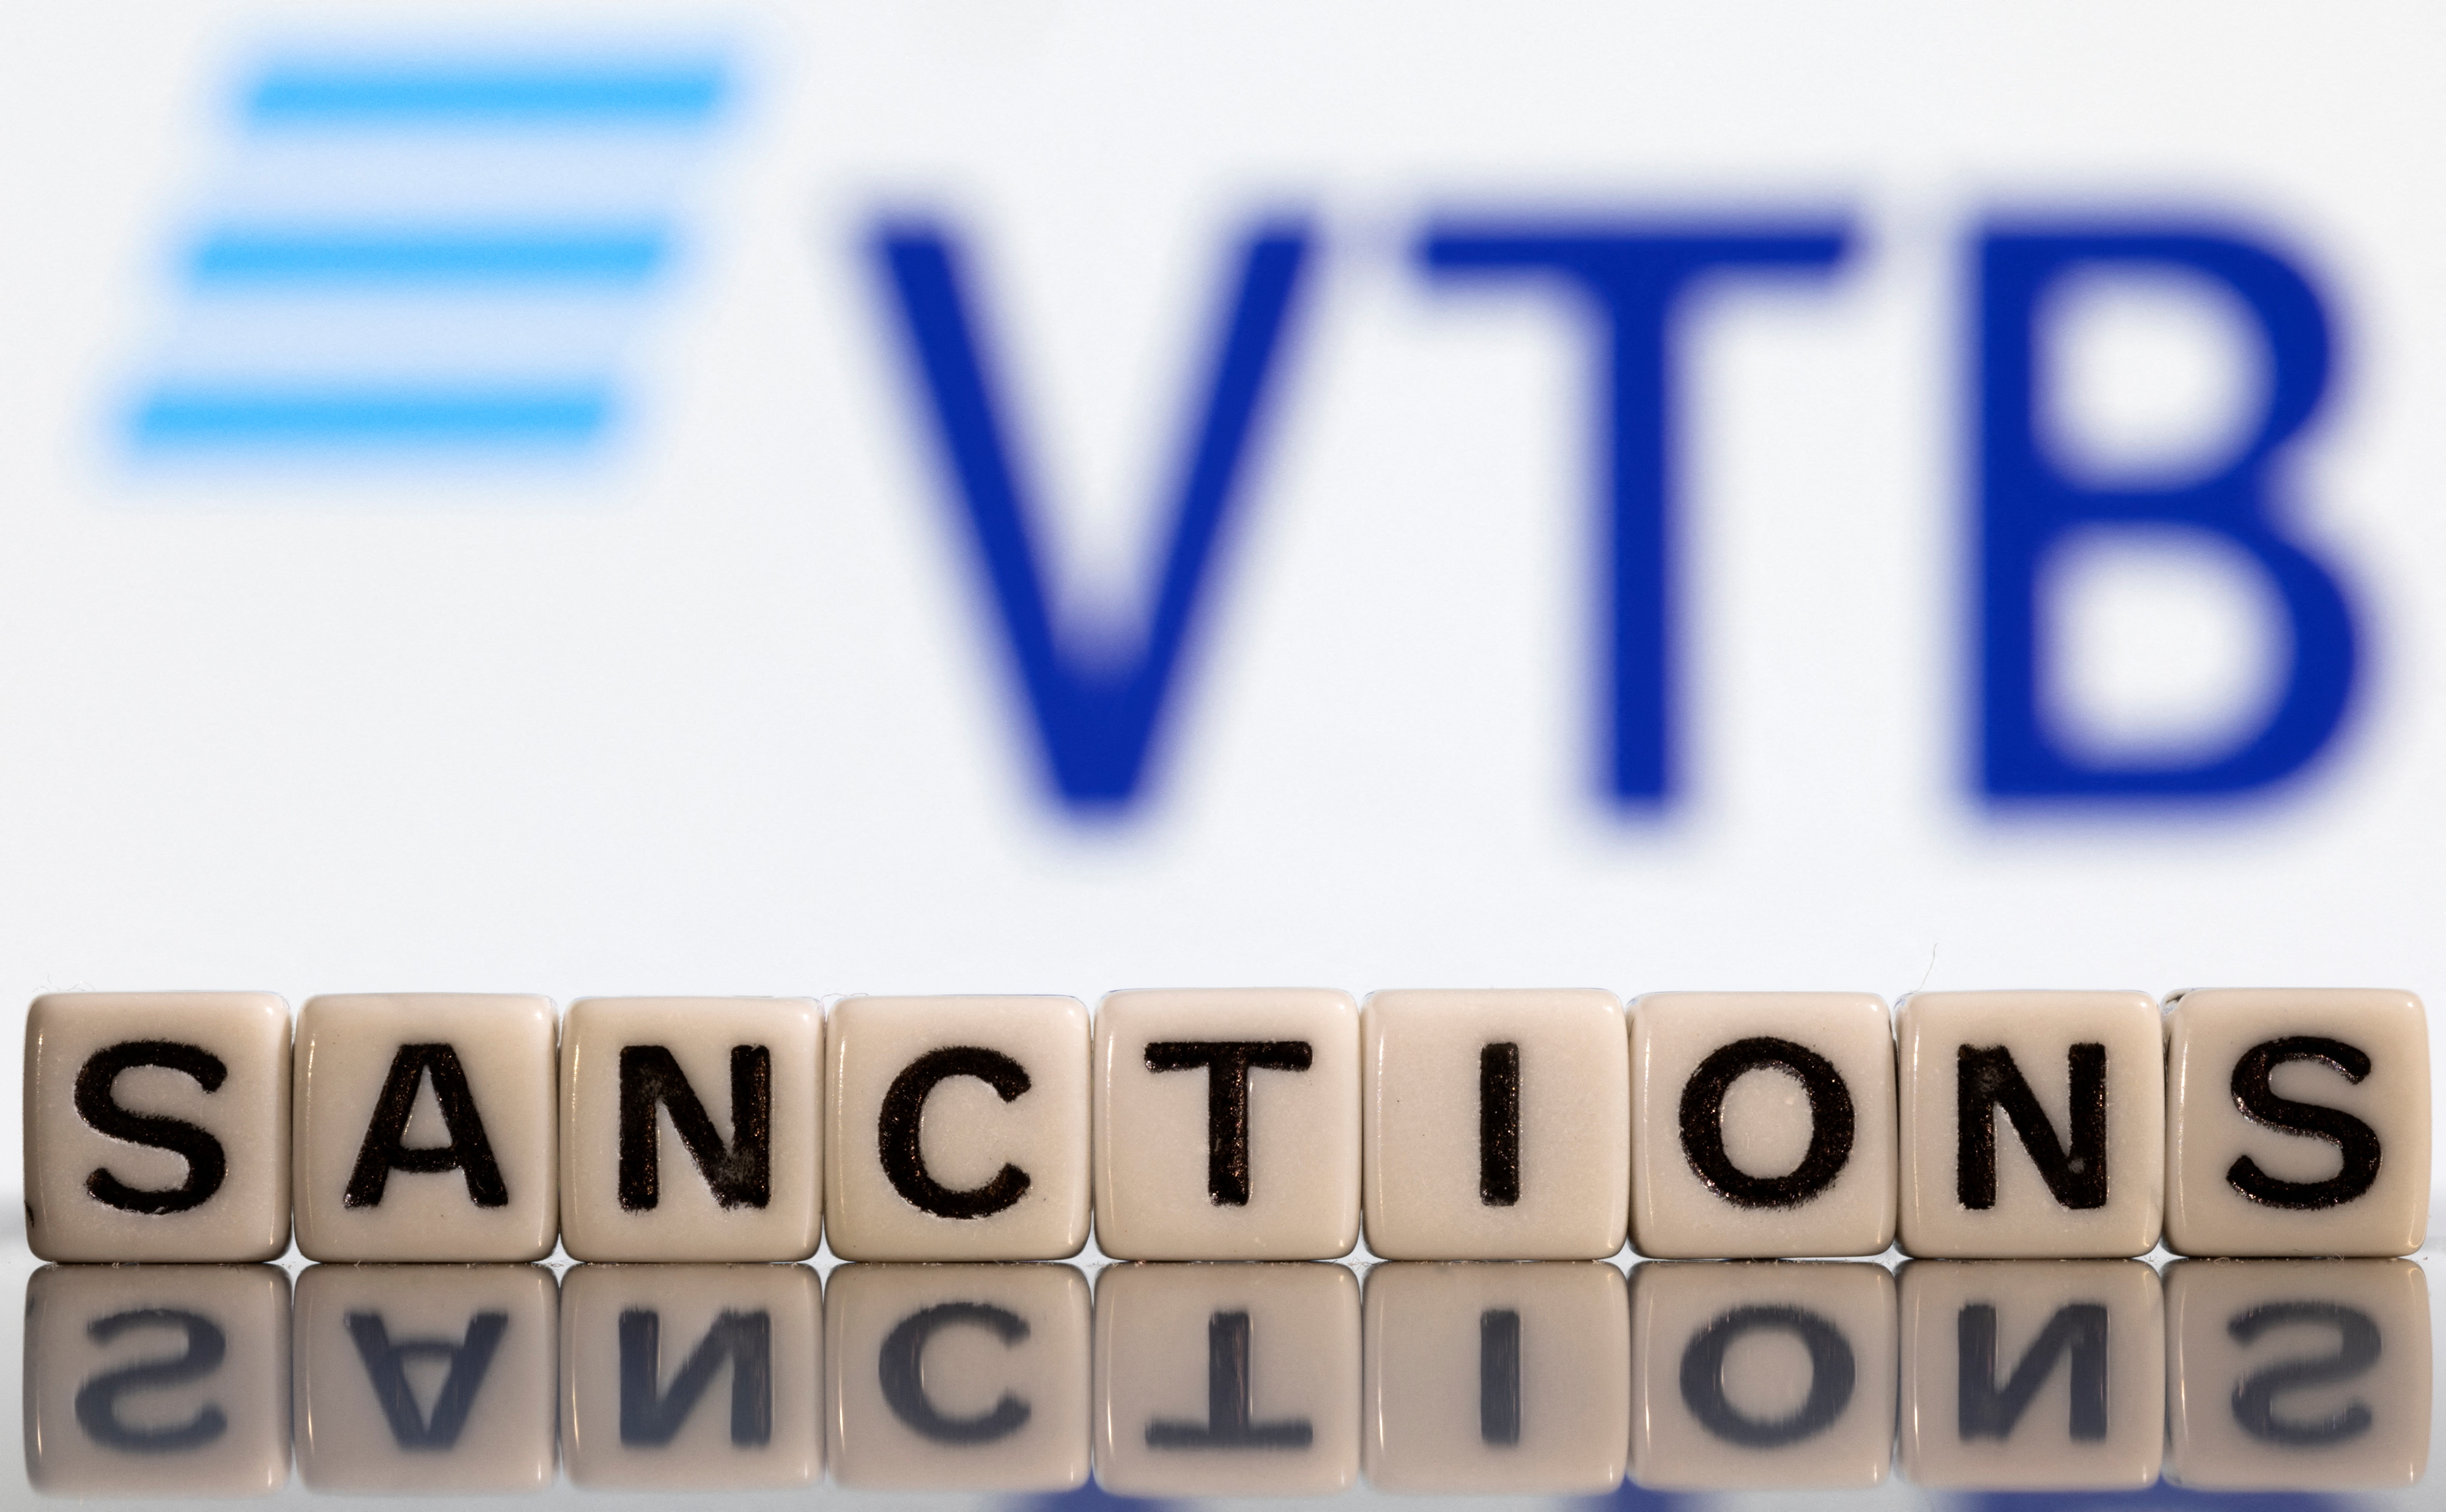 Illustration shows letters arranged to read "Sanctions" in front of VTB bank logo